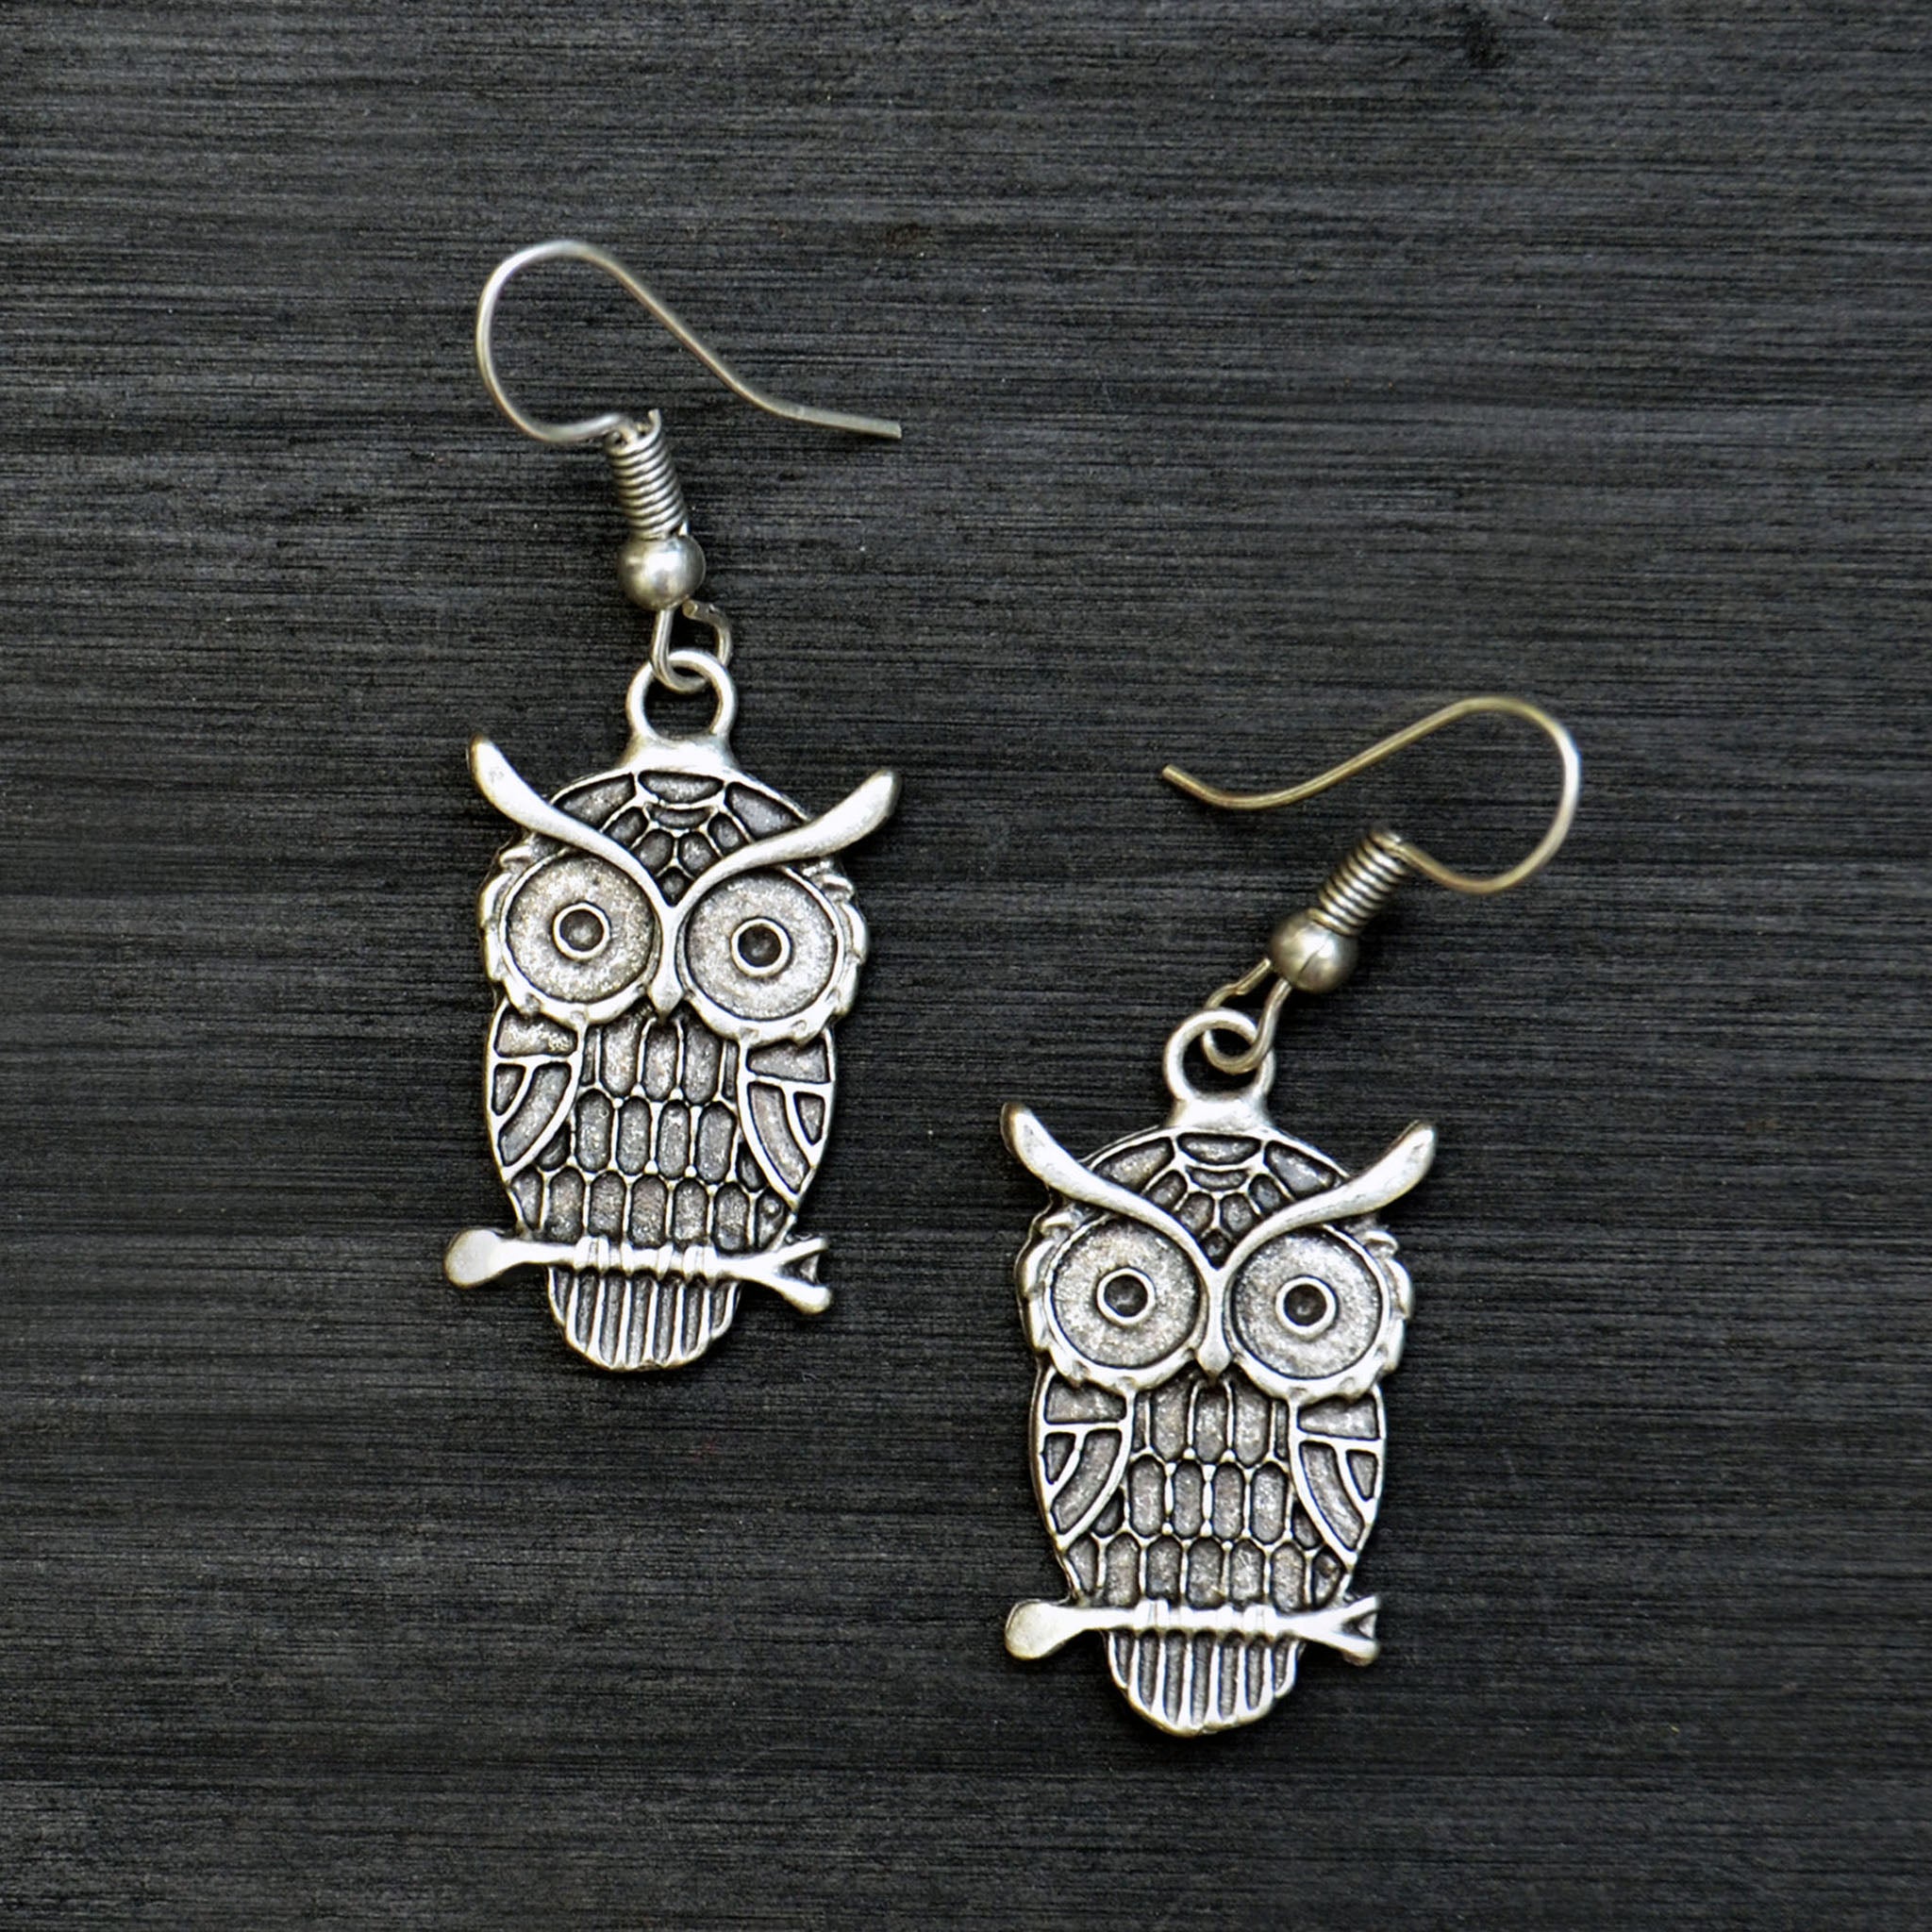 Small silver dangly owl earrings on black background